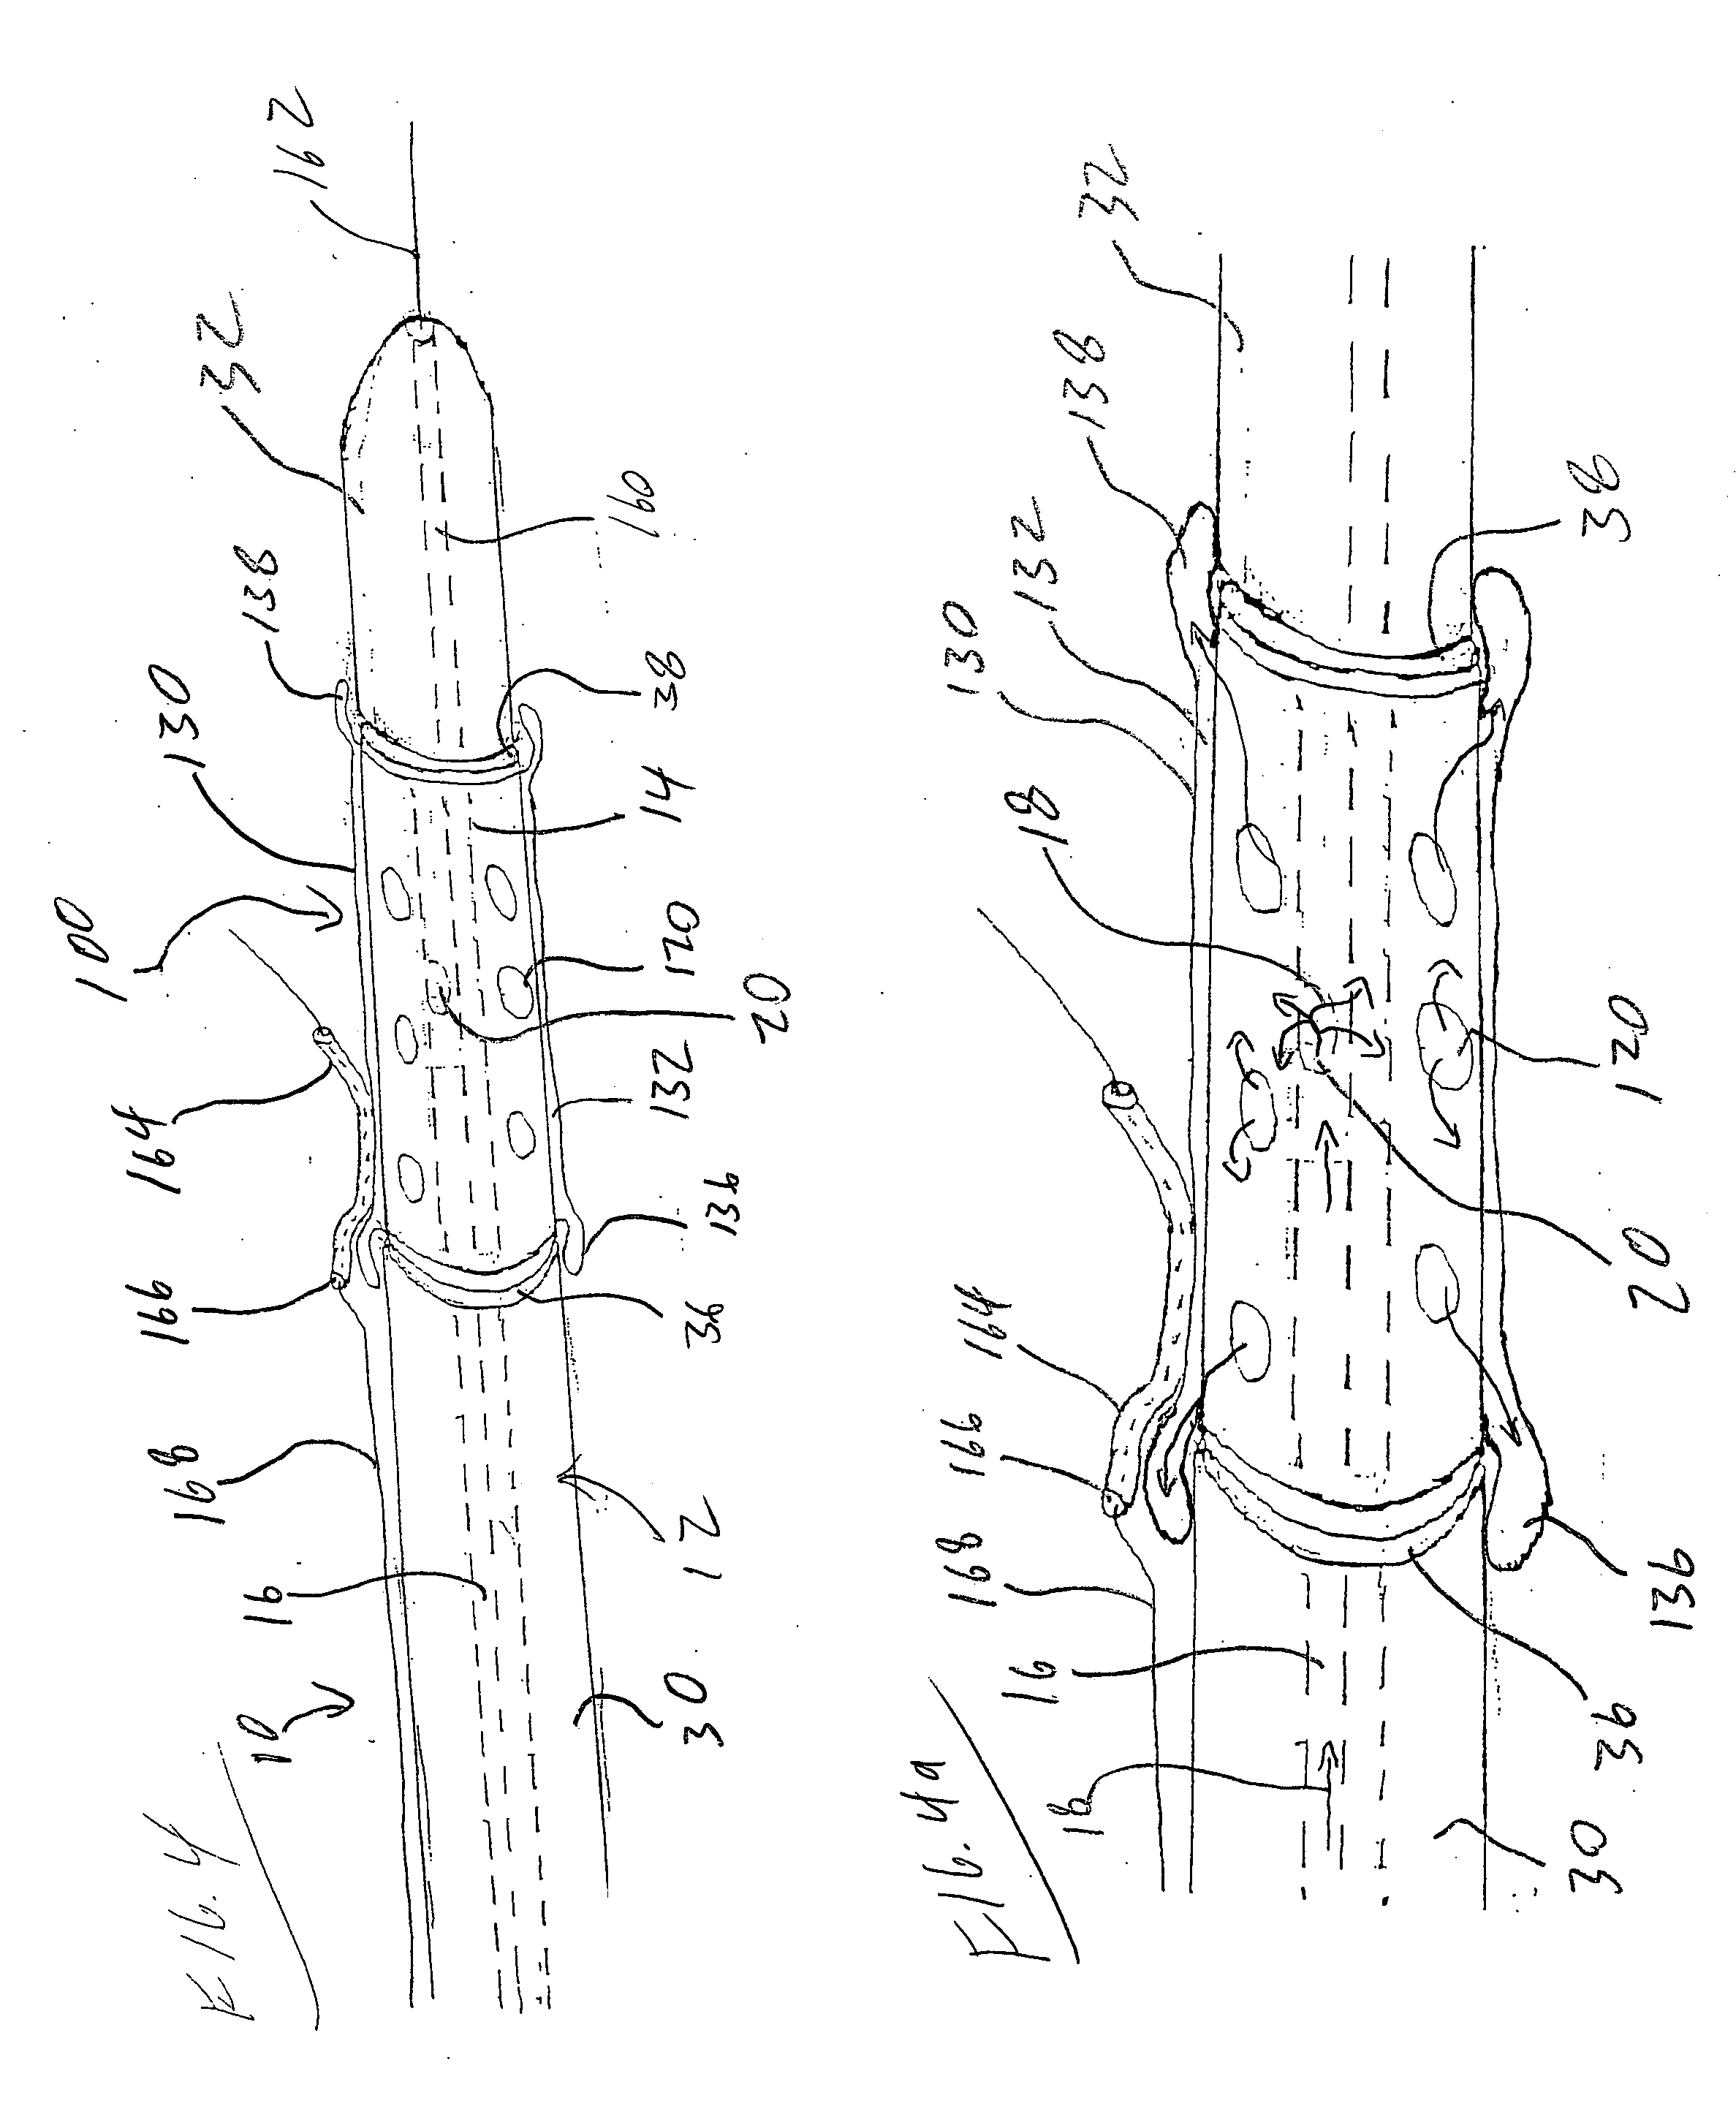 Rotating stent delivery system for side branch access and protection and method of using same